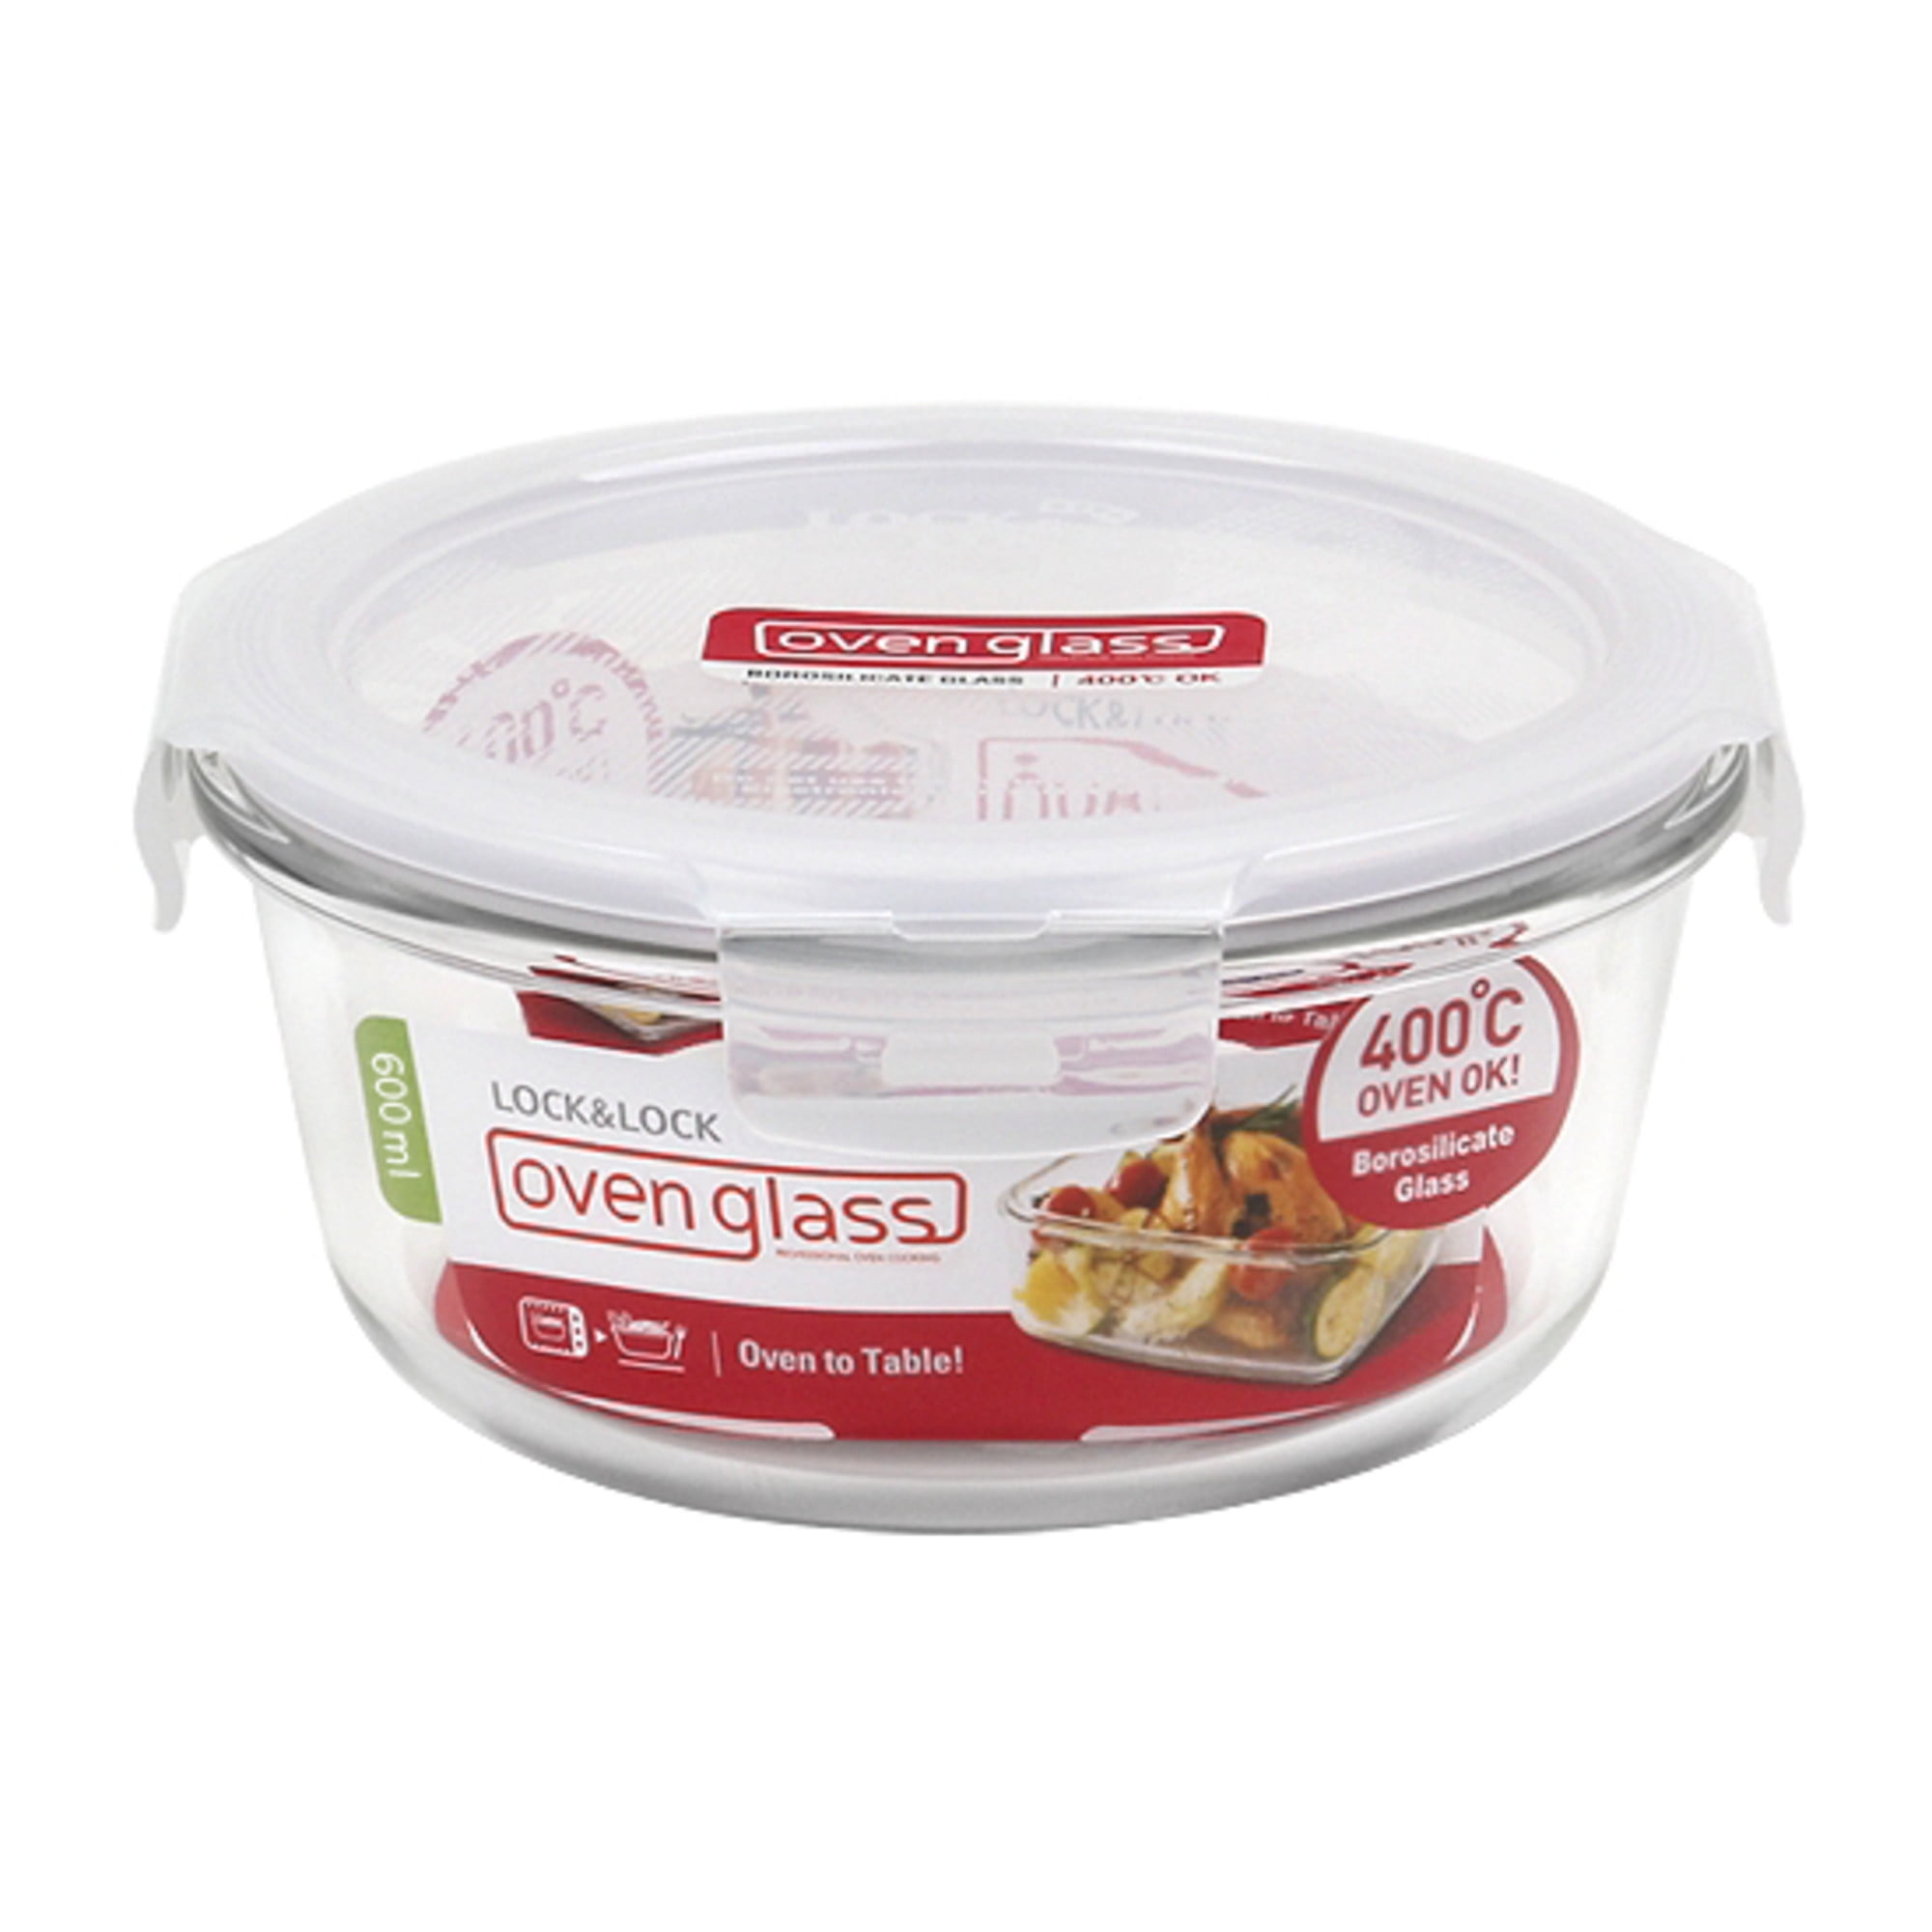 Round food storage container, 600 ml, made from glass, White - Glasslock